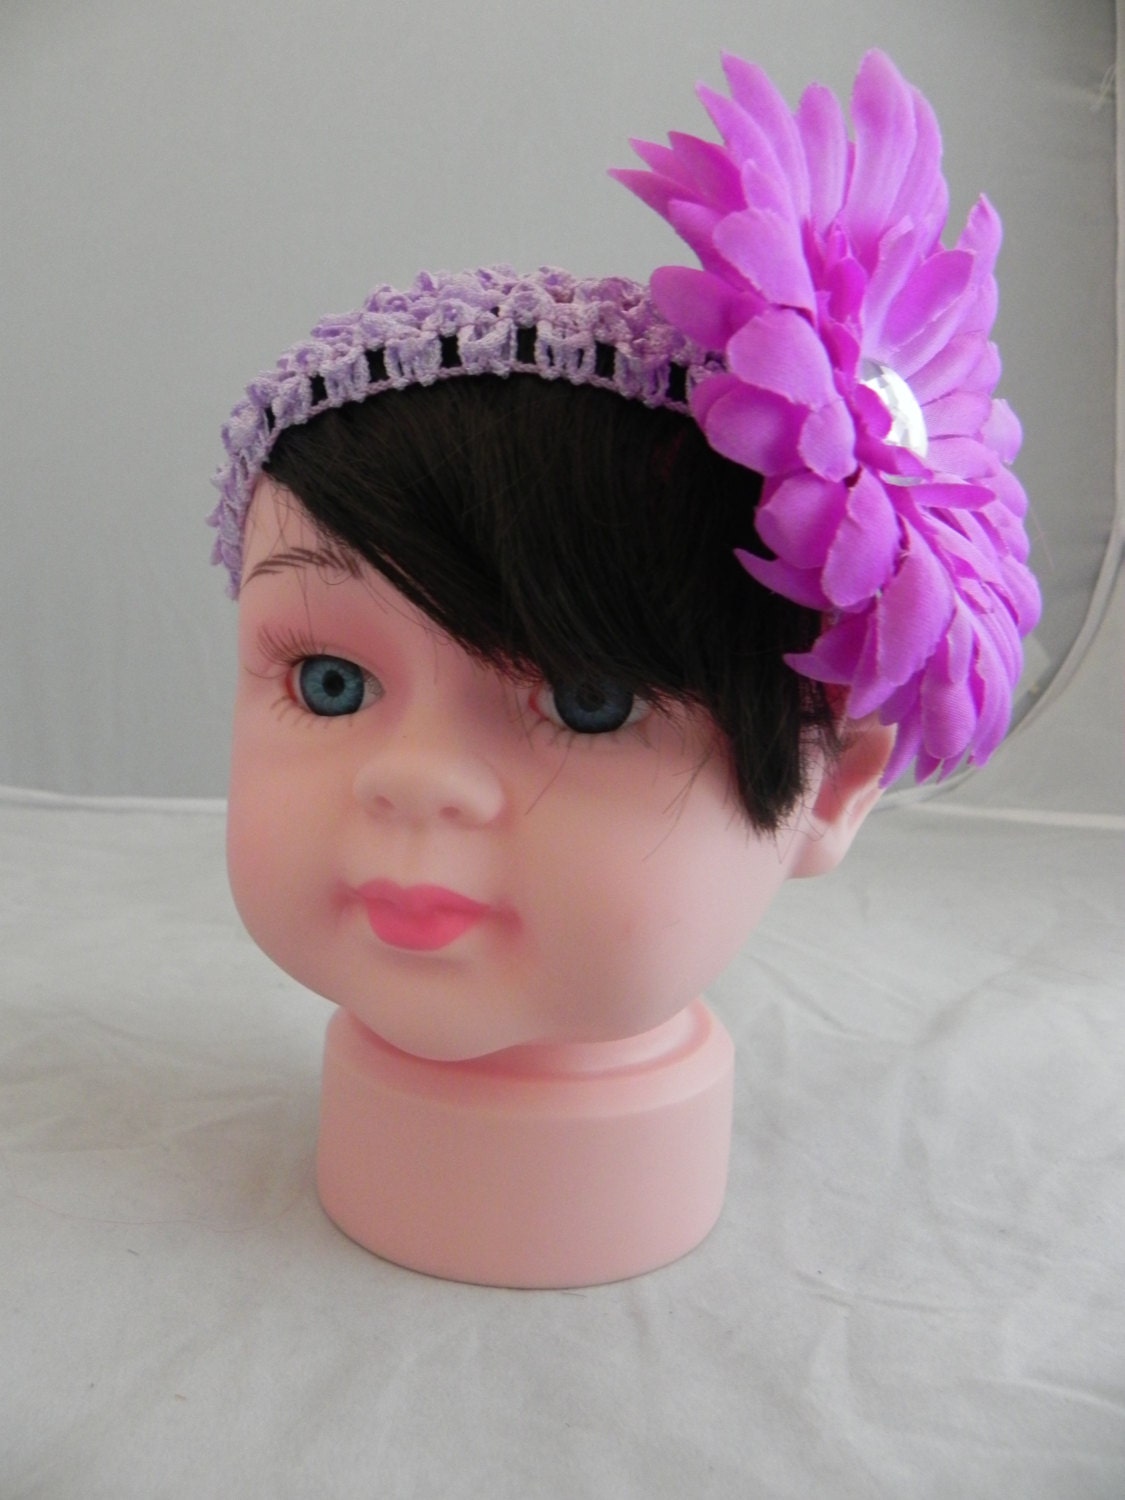 600 New baby headband hair extensions 582 Items similar to Baby Bangs   Headband with Hair Extensions for Little   